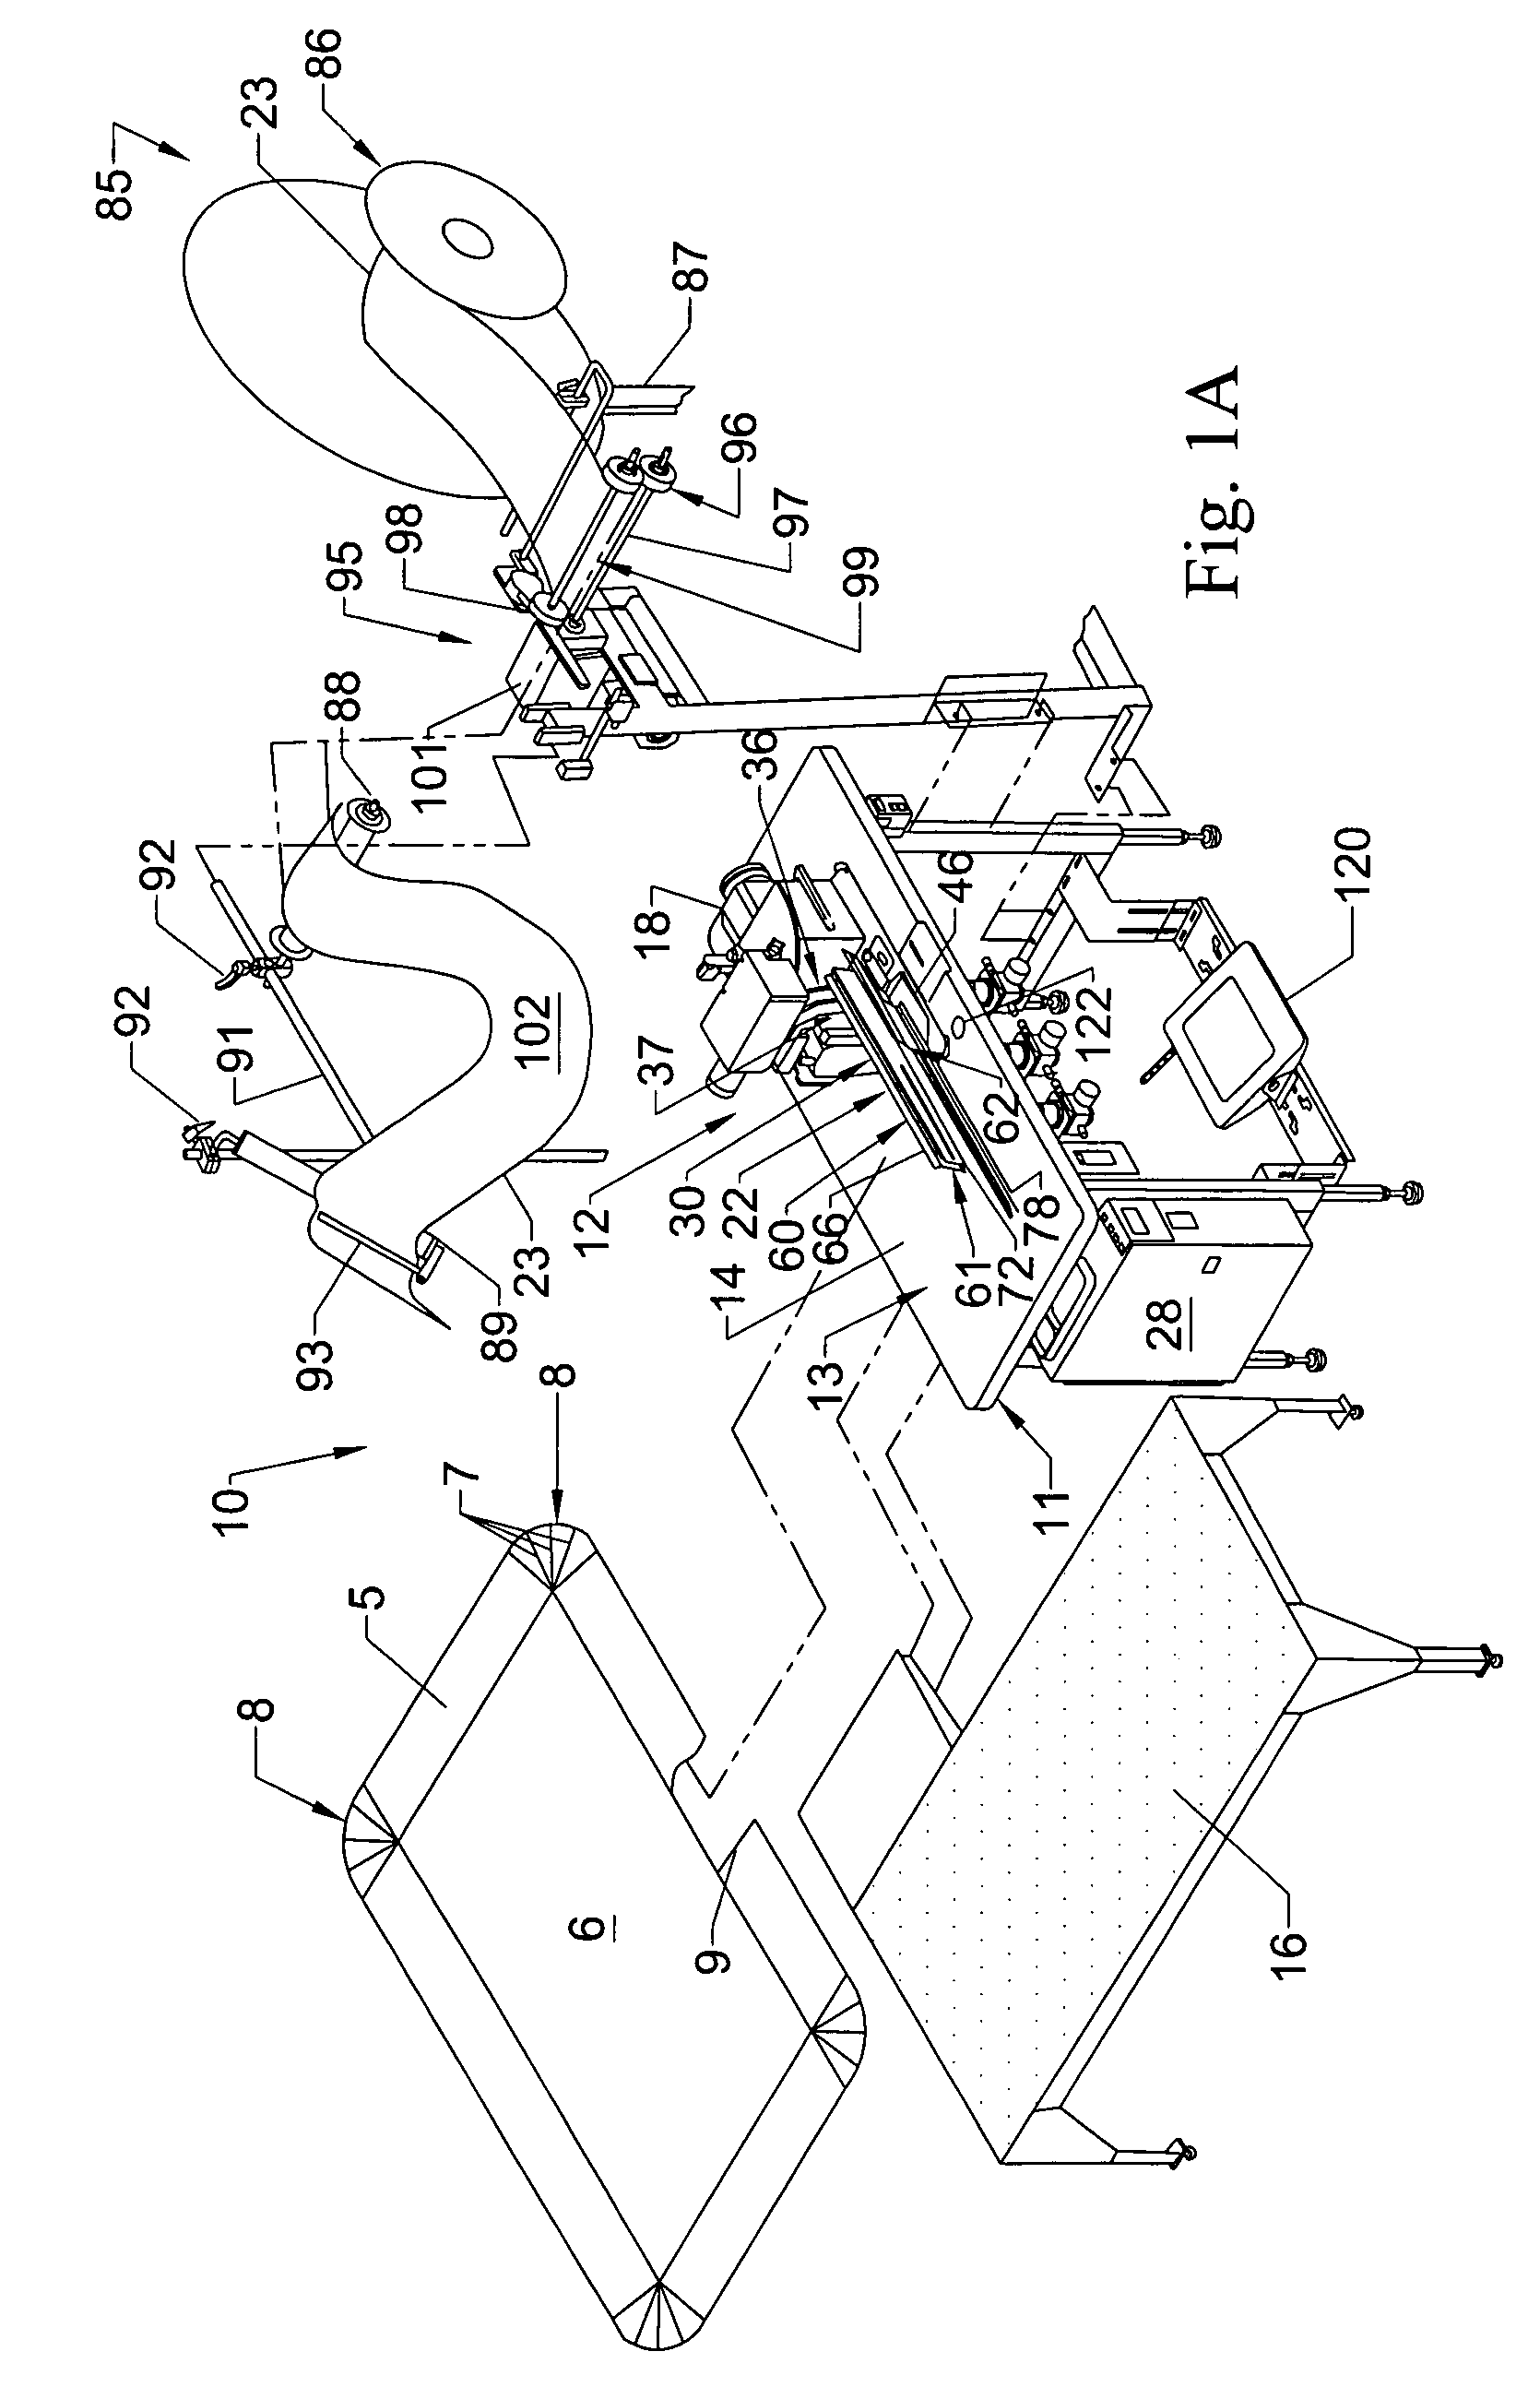 System and method of finishing ruffled gussets/borders